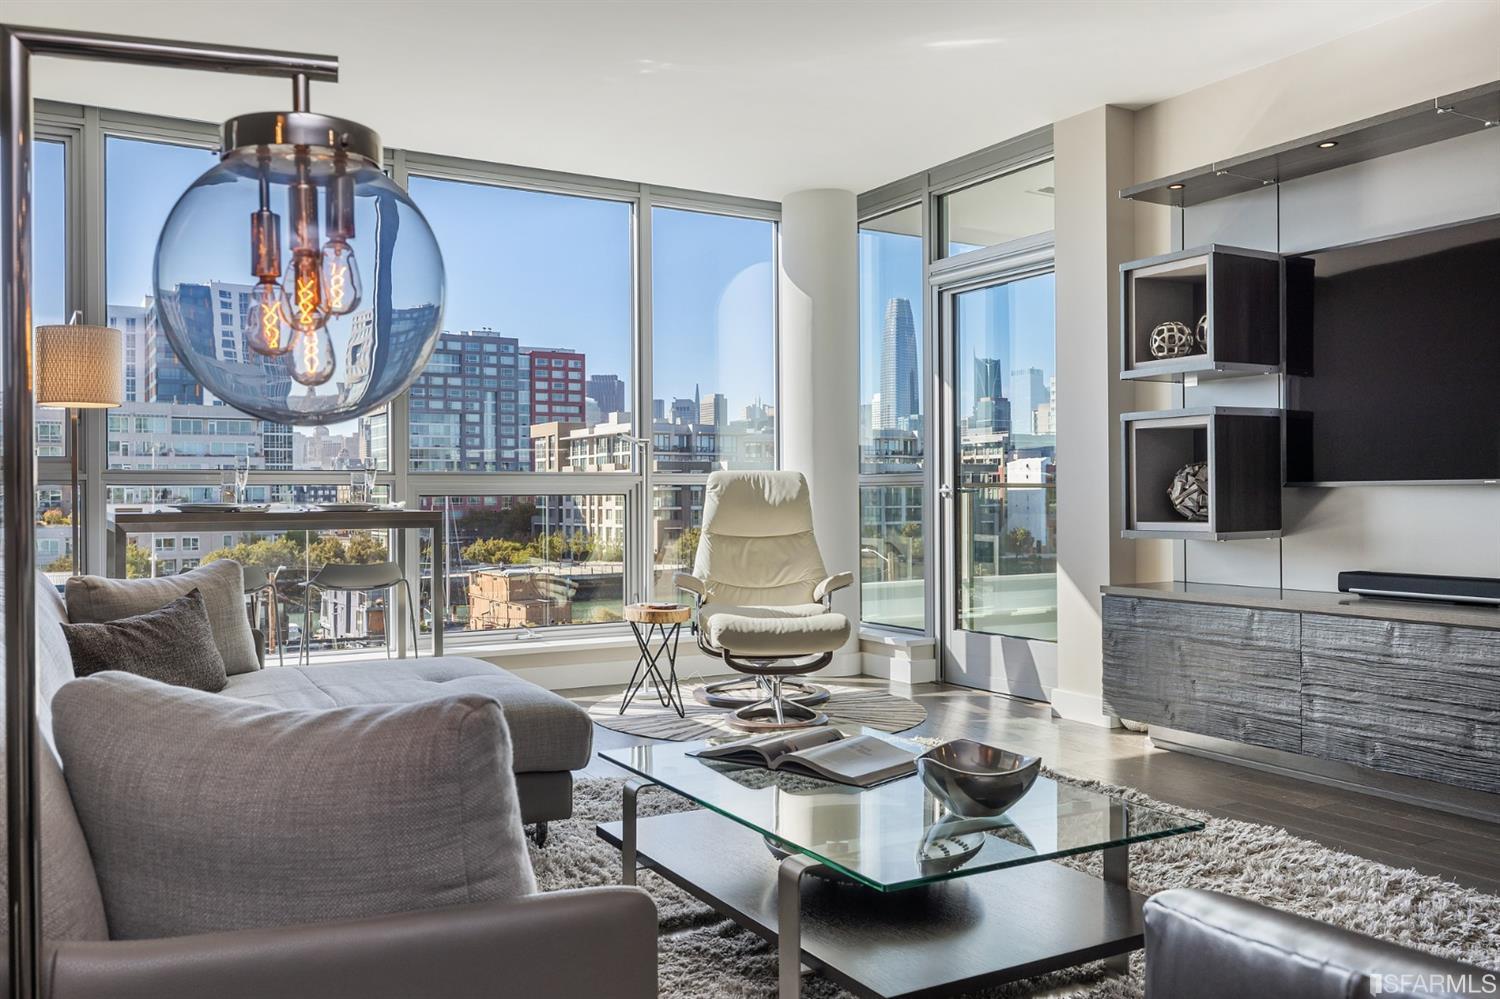 Residence 413 at Arden is a bespoke urban home with all the bells and whistles and big views.